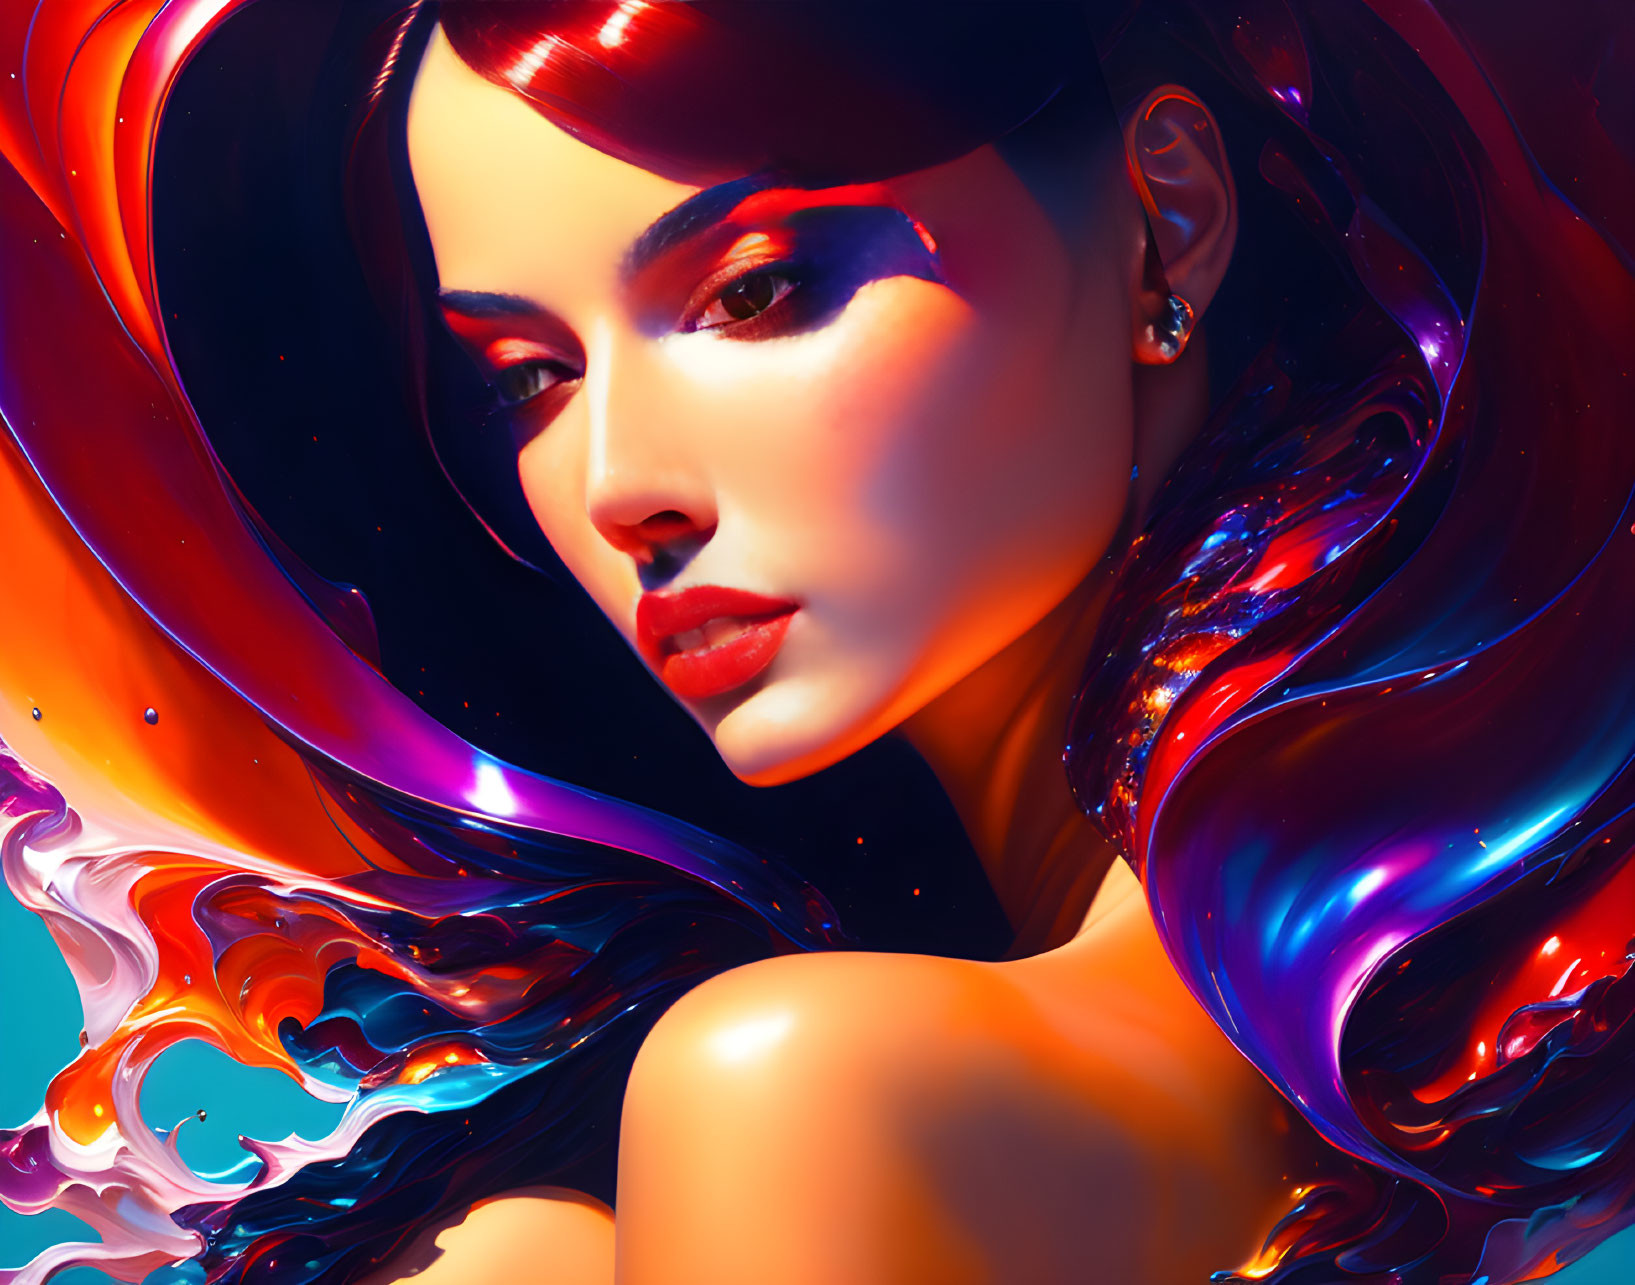 Colorful digital artwork: Woman with flowing liquid-like hair on fiery background